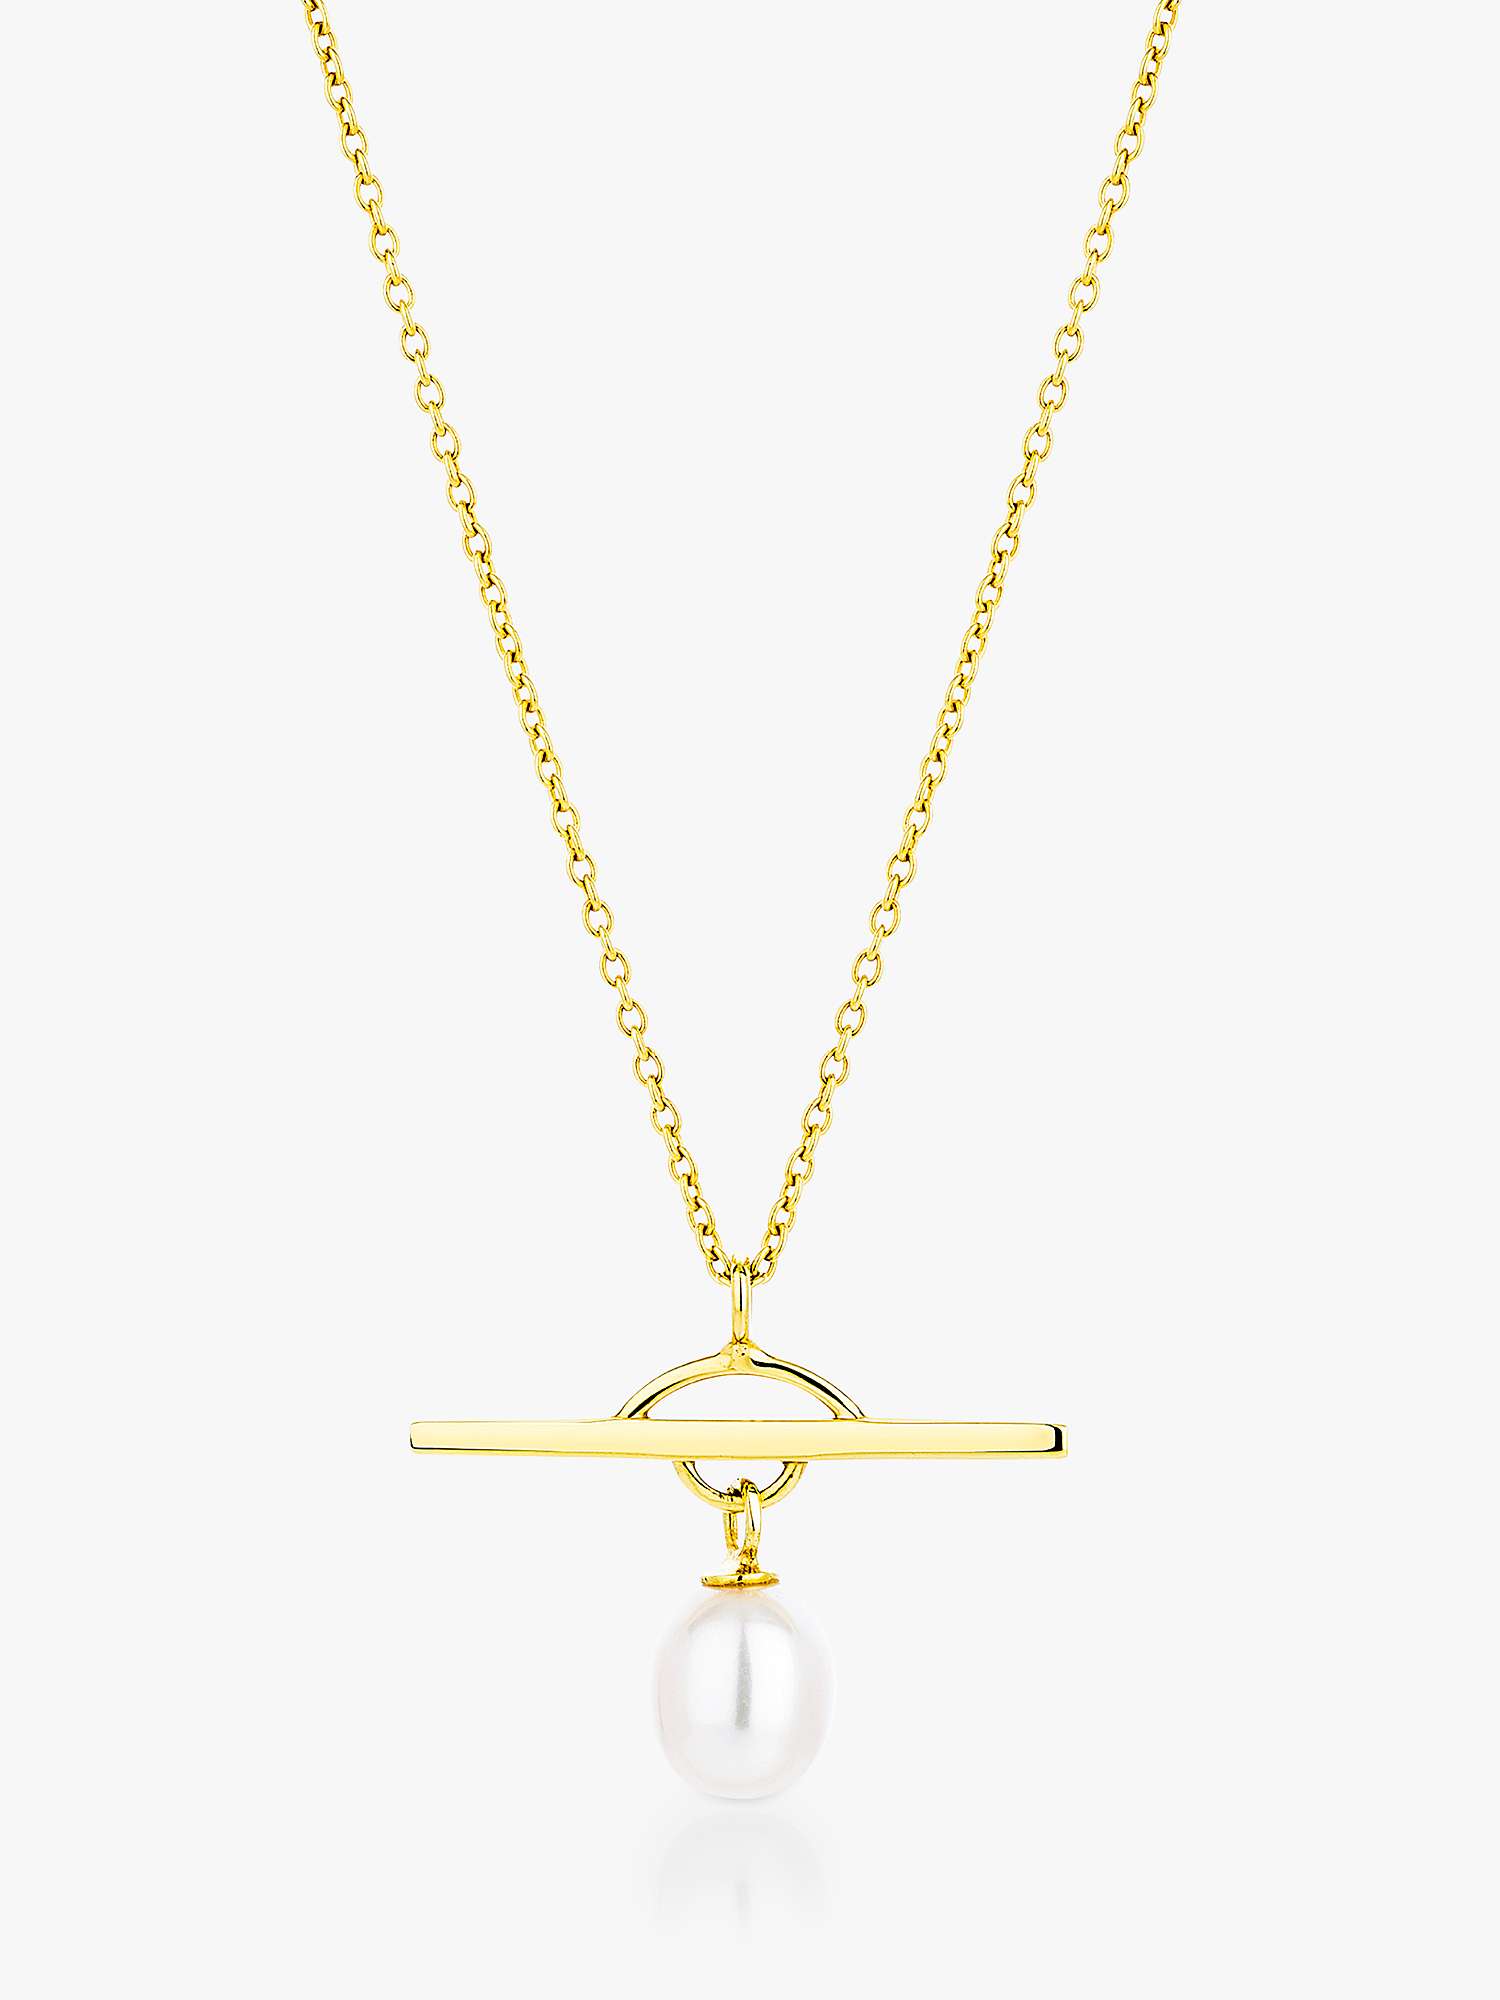 Buy Claudia Bradby Chakra Freshwater Pearl Pendant Necklace Online at johnlewis.com